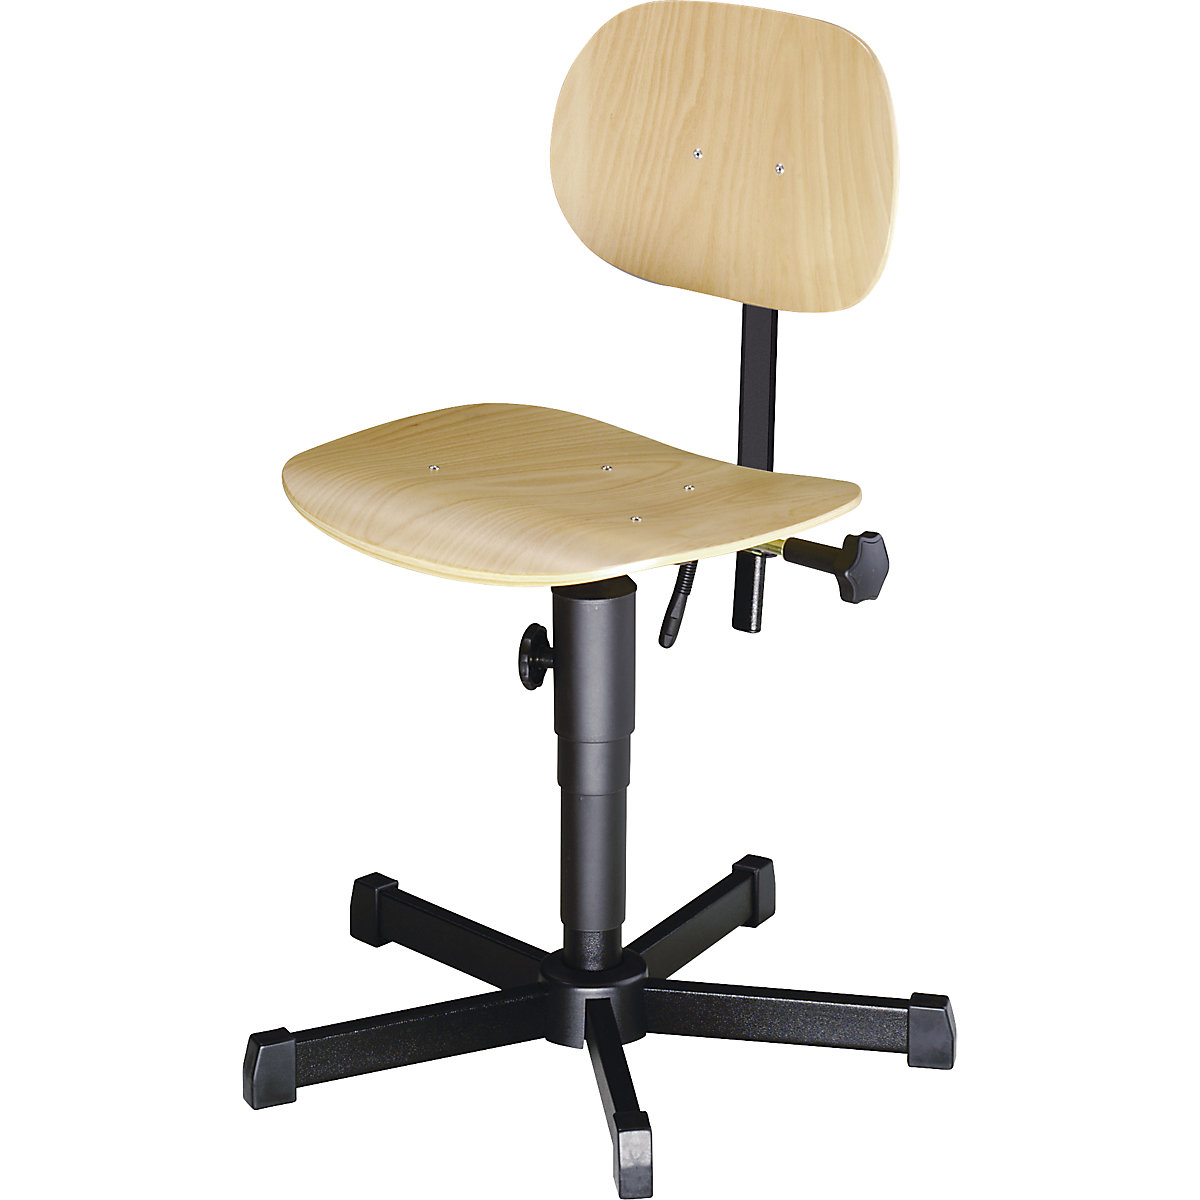 Industrial swivel chair, manual height adjustment - meychair